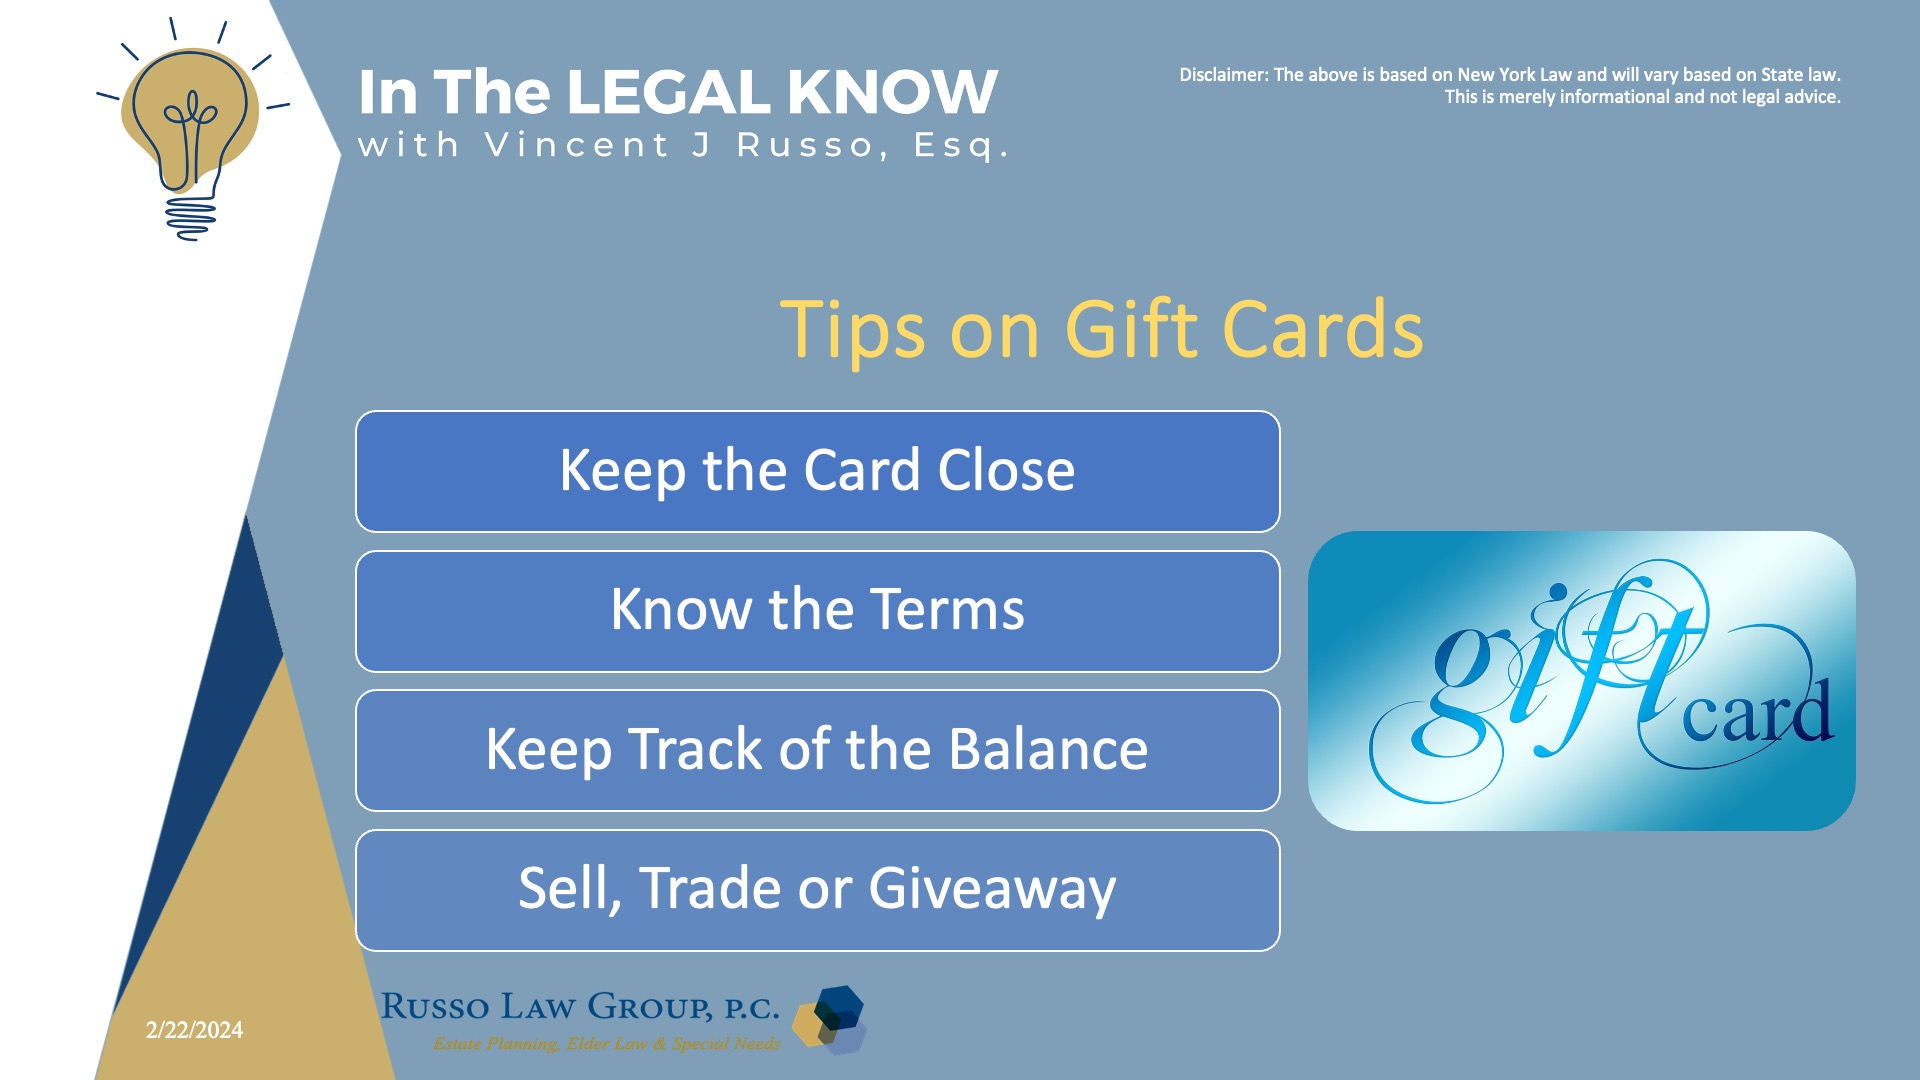 Tips on Gift Cards